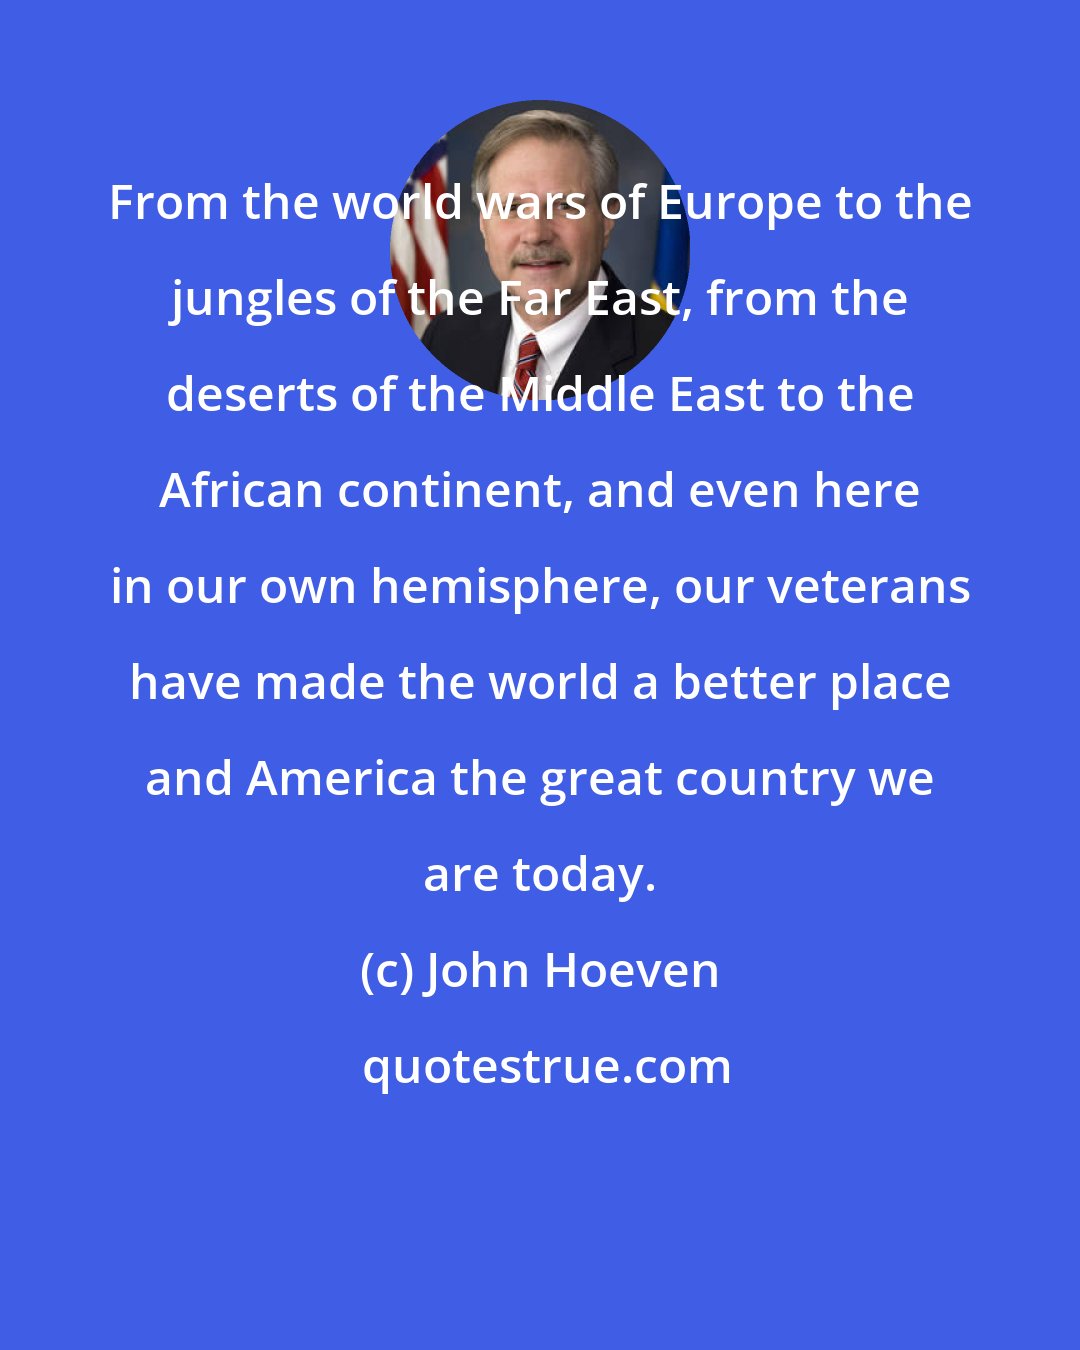 John Hoeven: From the world wars of Europe to the jungles of the Far East, from the deserts of the Middle East to the African continent, and even here in our own hemisphere, our veterans have made the world a better place and America the great country we are today.